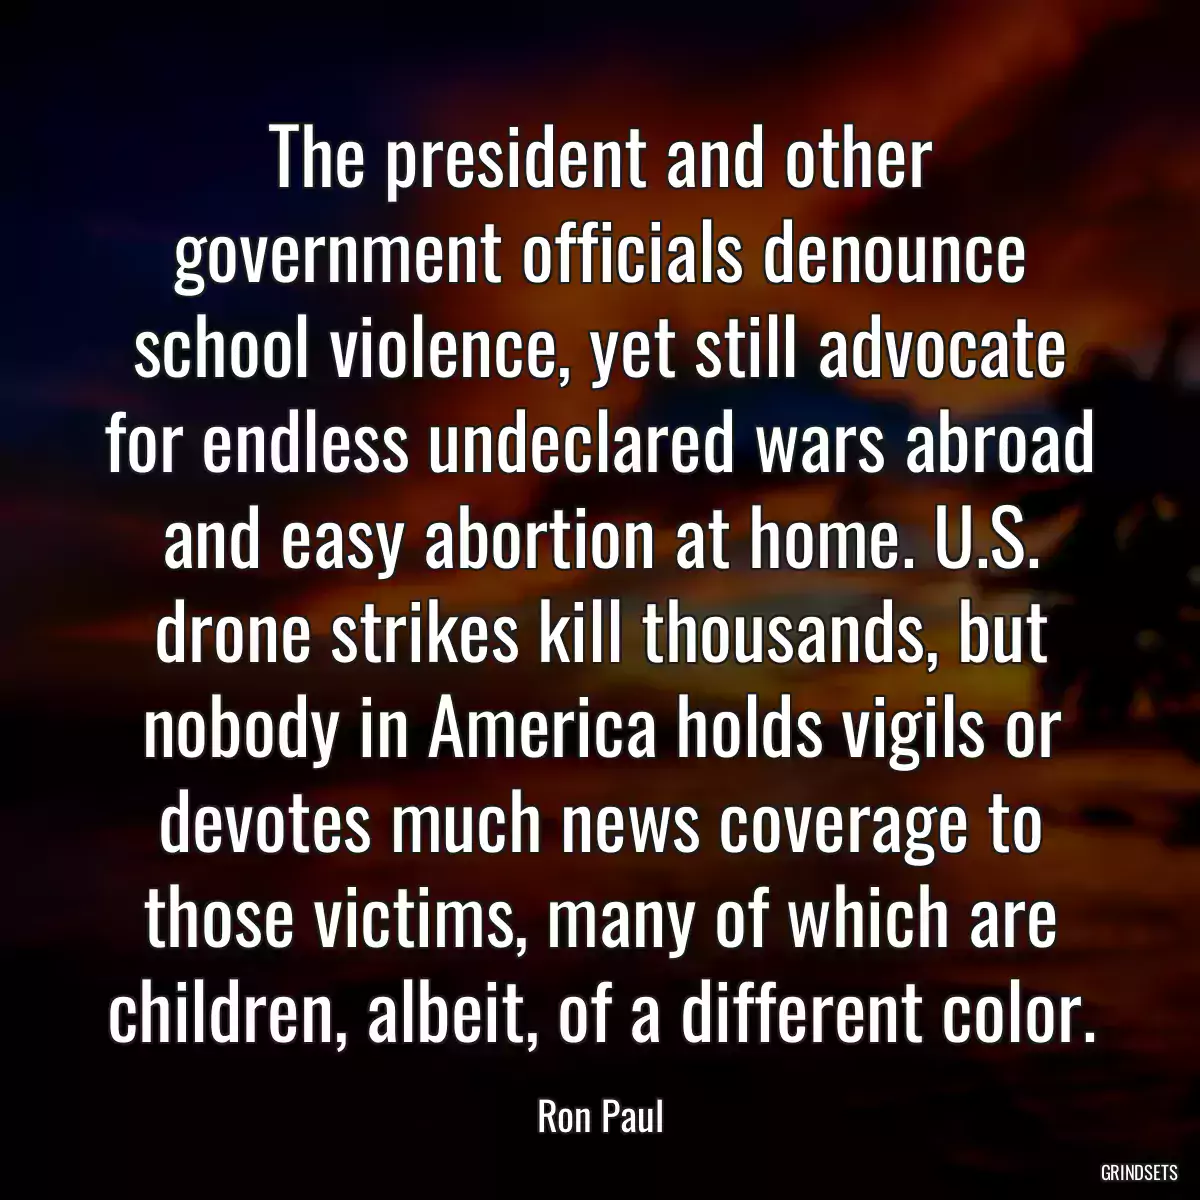 The president and other government officials denounce school violence, yet still advocate for endless undeclared wars abroad and easy abortion at home. U.S. drone strikes kill thousands, but nobody in America holds vigils or devotes much news coverage to those victims, many of which are children, albeit, of a different color.